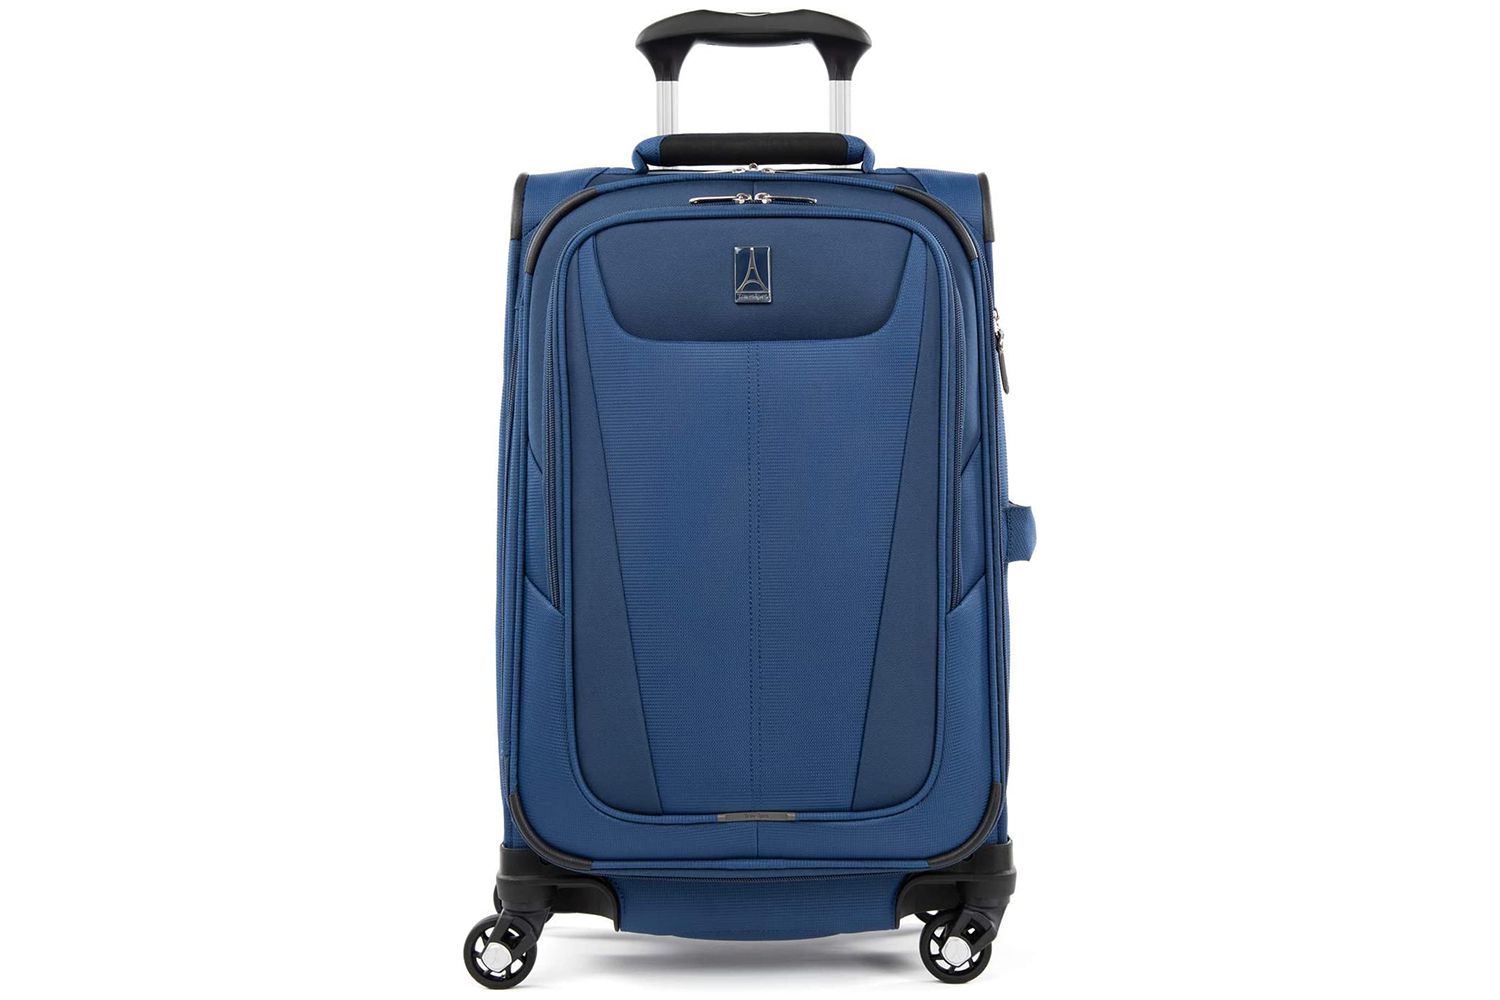 Travelpro Maxlite 5 Carry-On Expandable Spinner